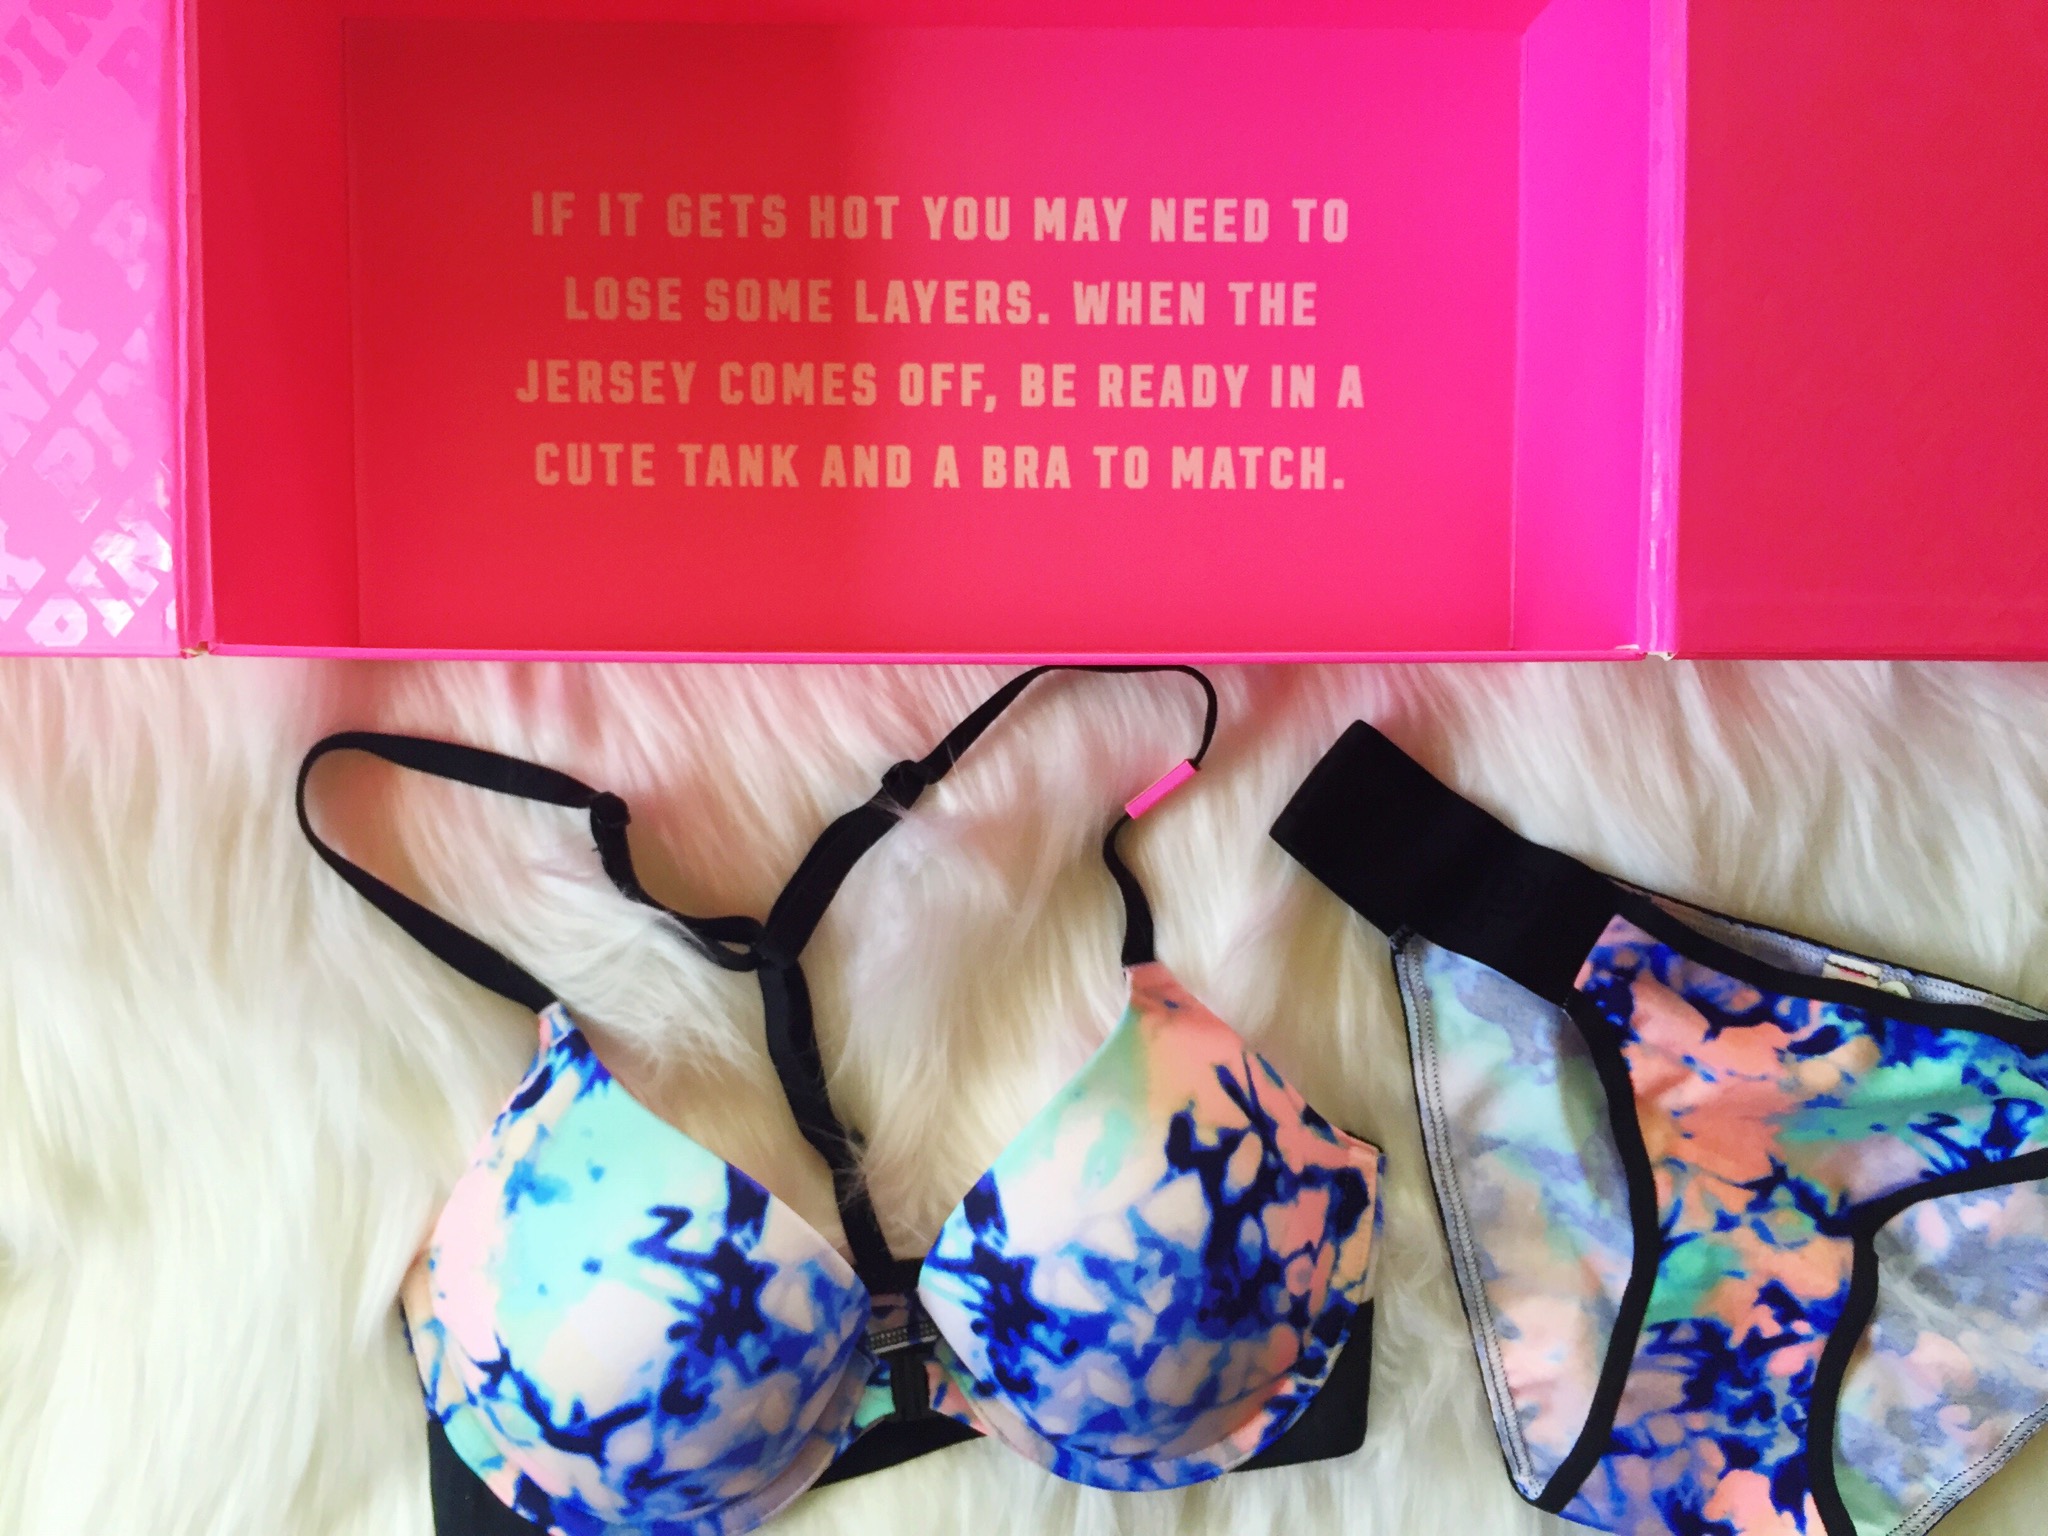 Victoria's Secret PINK Sponsored Stylist: Wear Everywhere Collection! –  Simply Tess